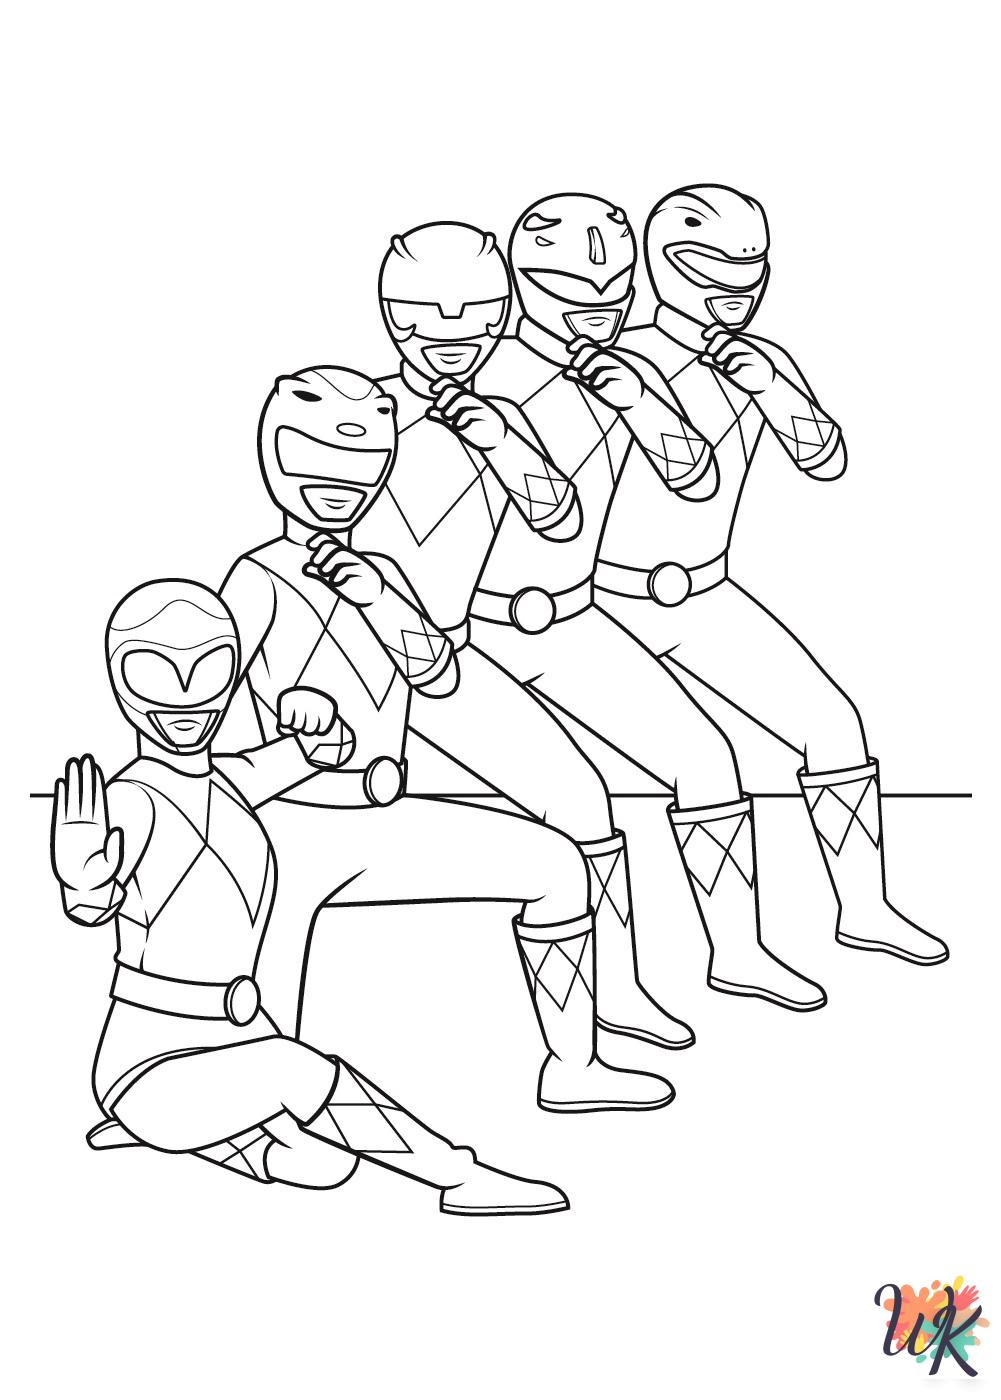 Power Rangers coloring pages free